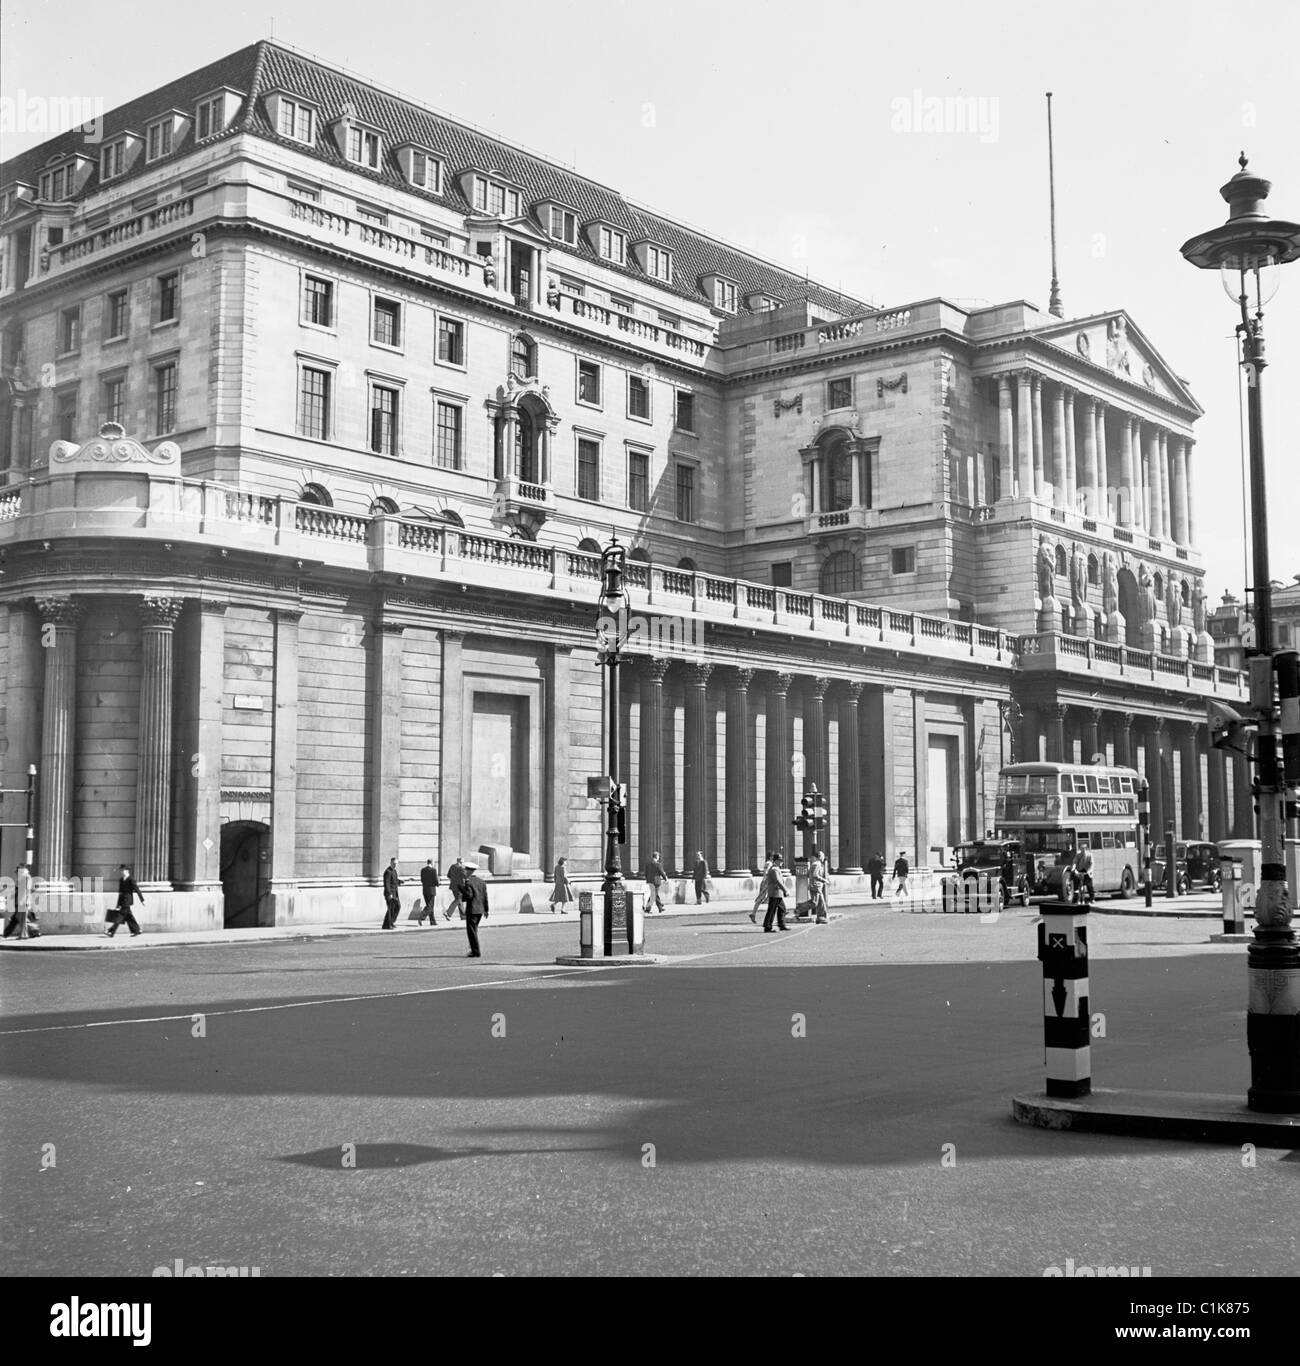 1950s, the exterior of the Bank of England on Threadneedle Street, City of London, with people and vehicles of the day, including a routemaster bus. Stock Photo